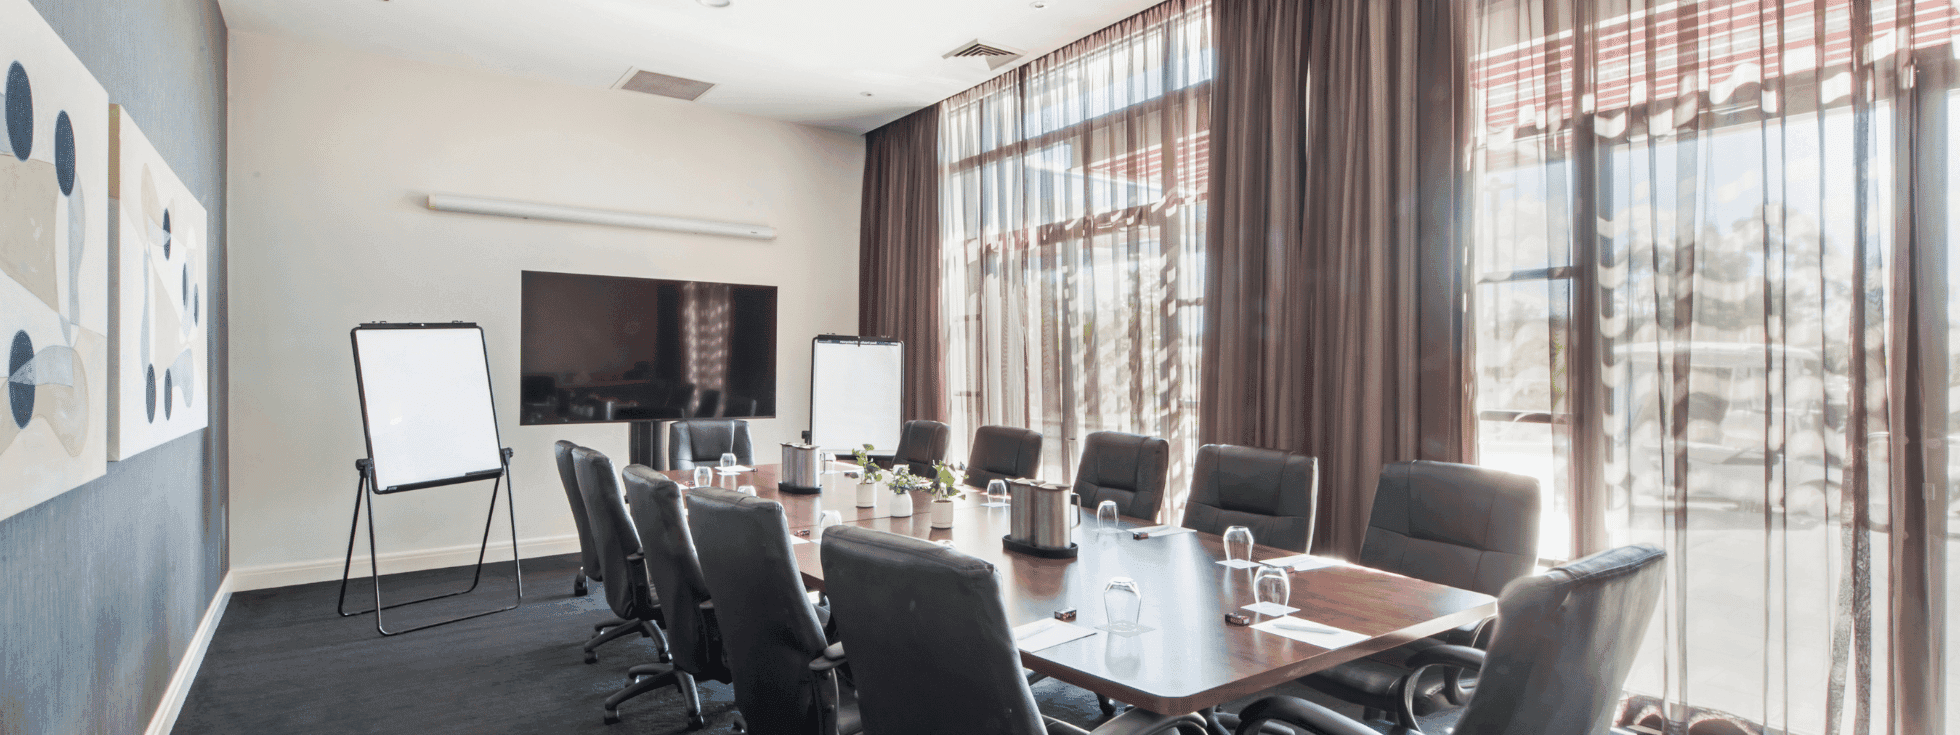 Central Coast sleek and professional space equipped for productive meetings and strategic discussions.